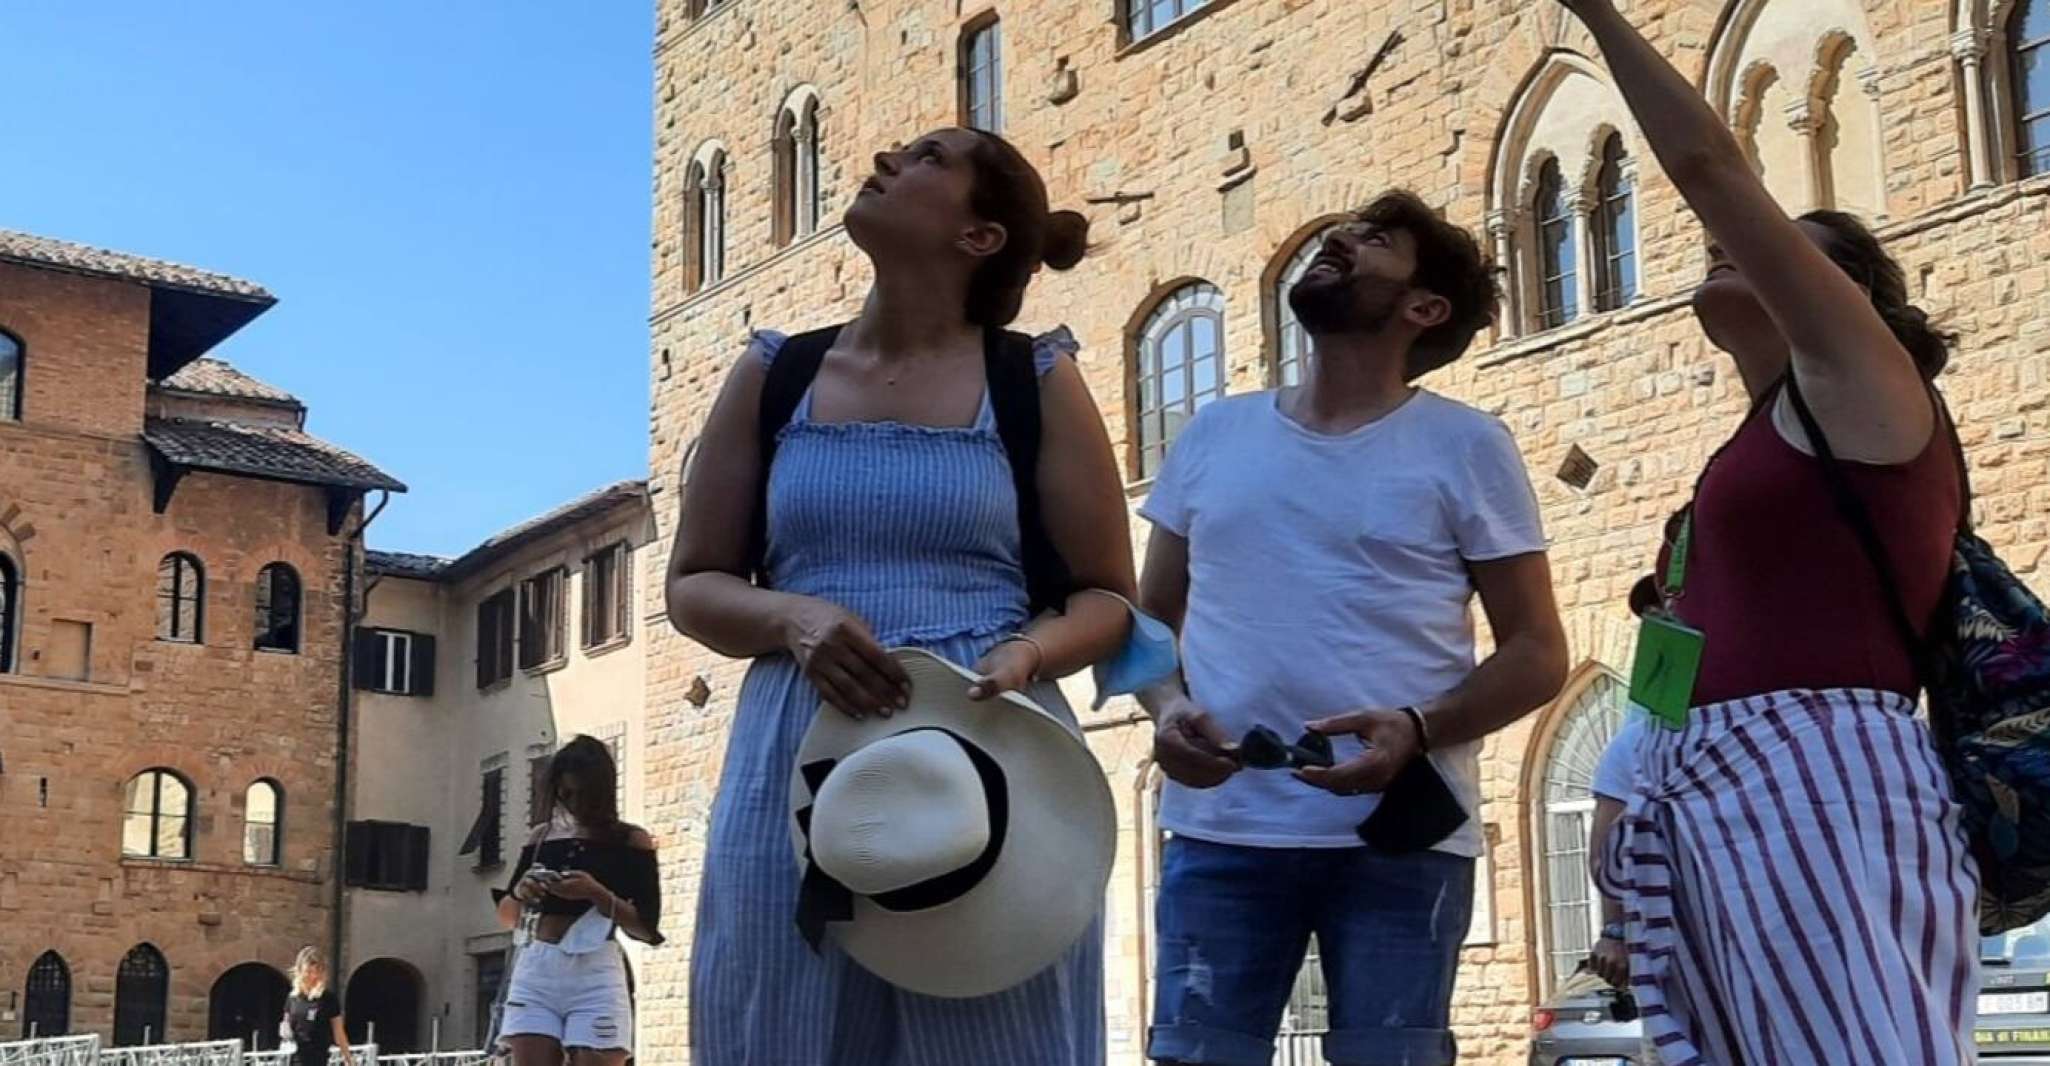 Discover Volterra with Licensed Tour Guide - Housity